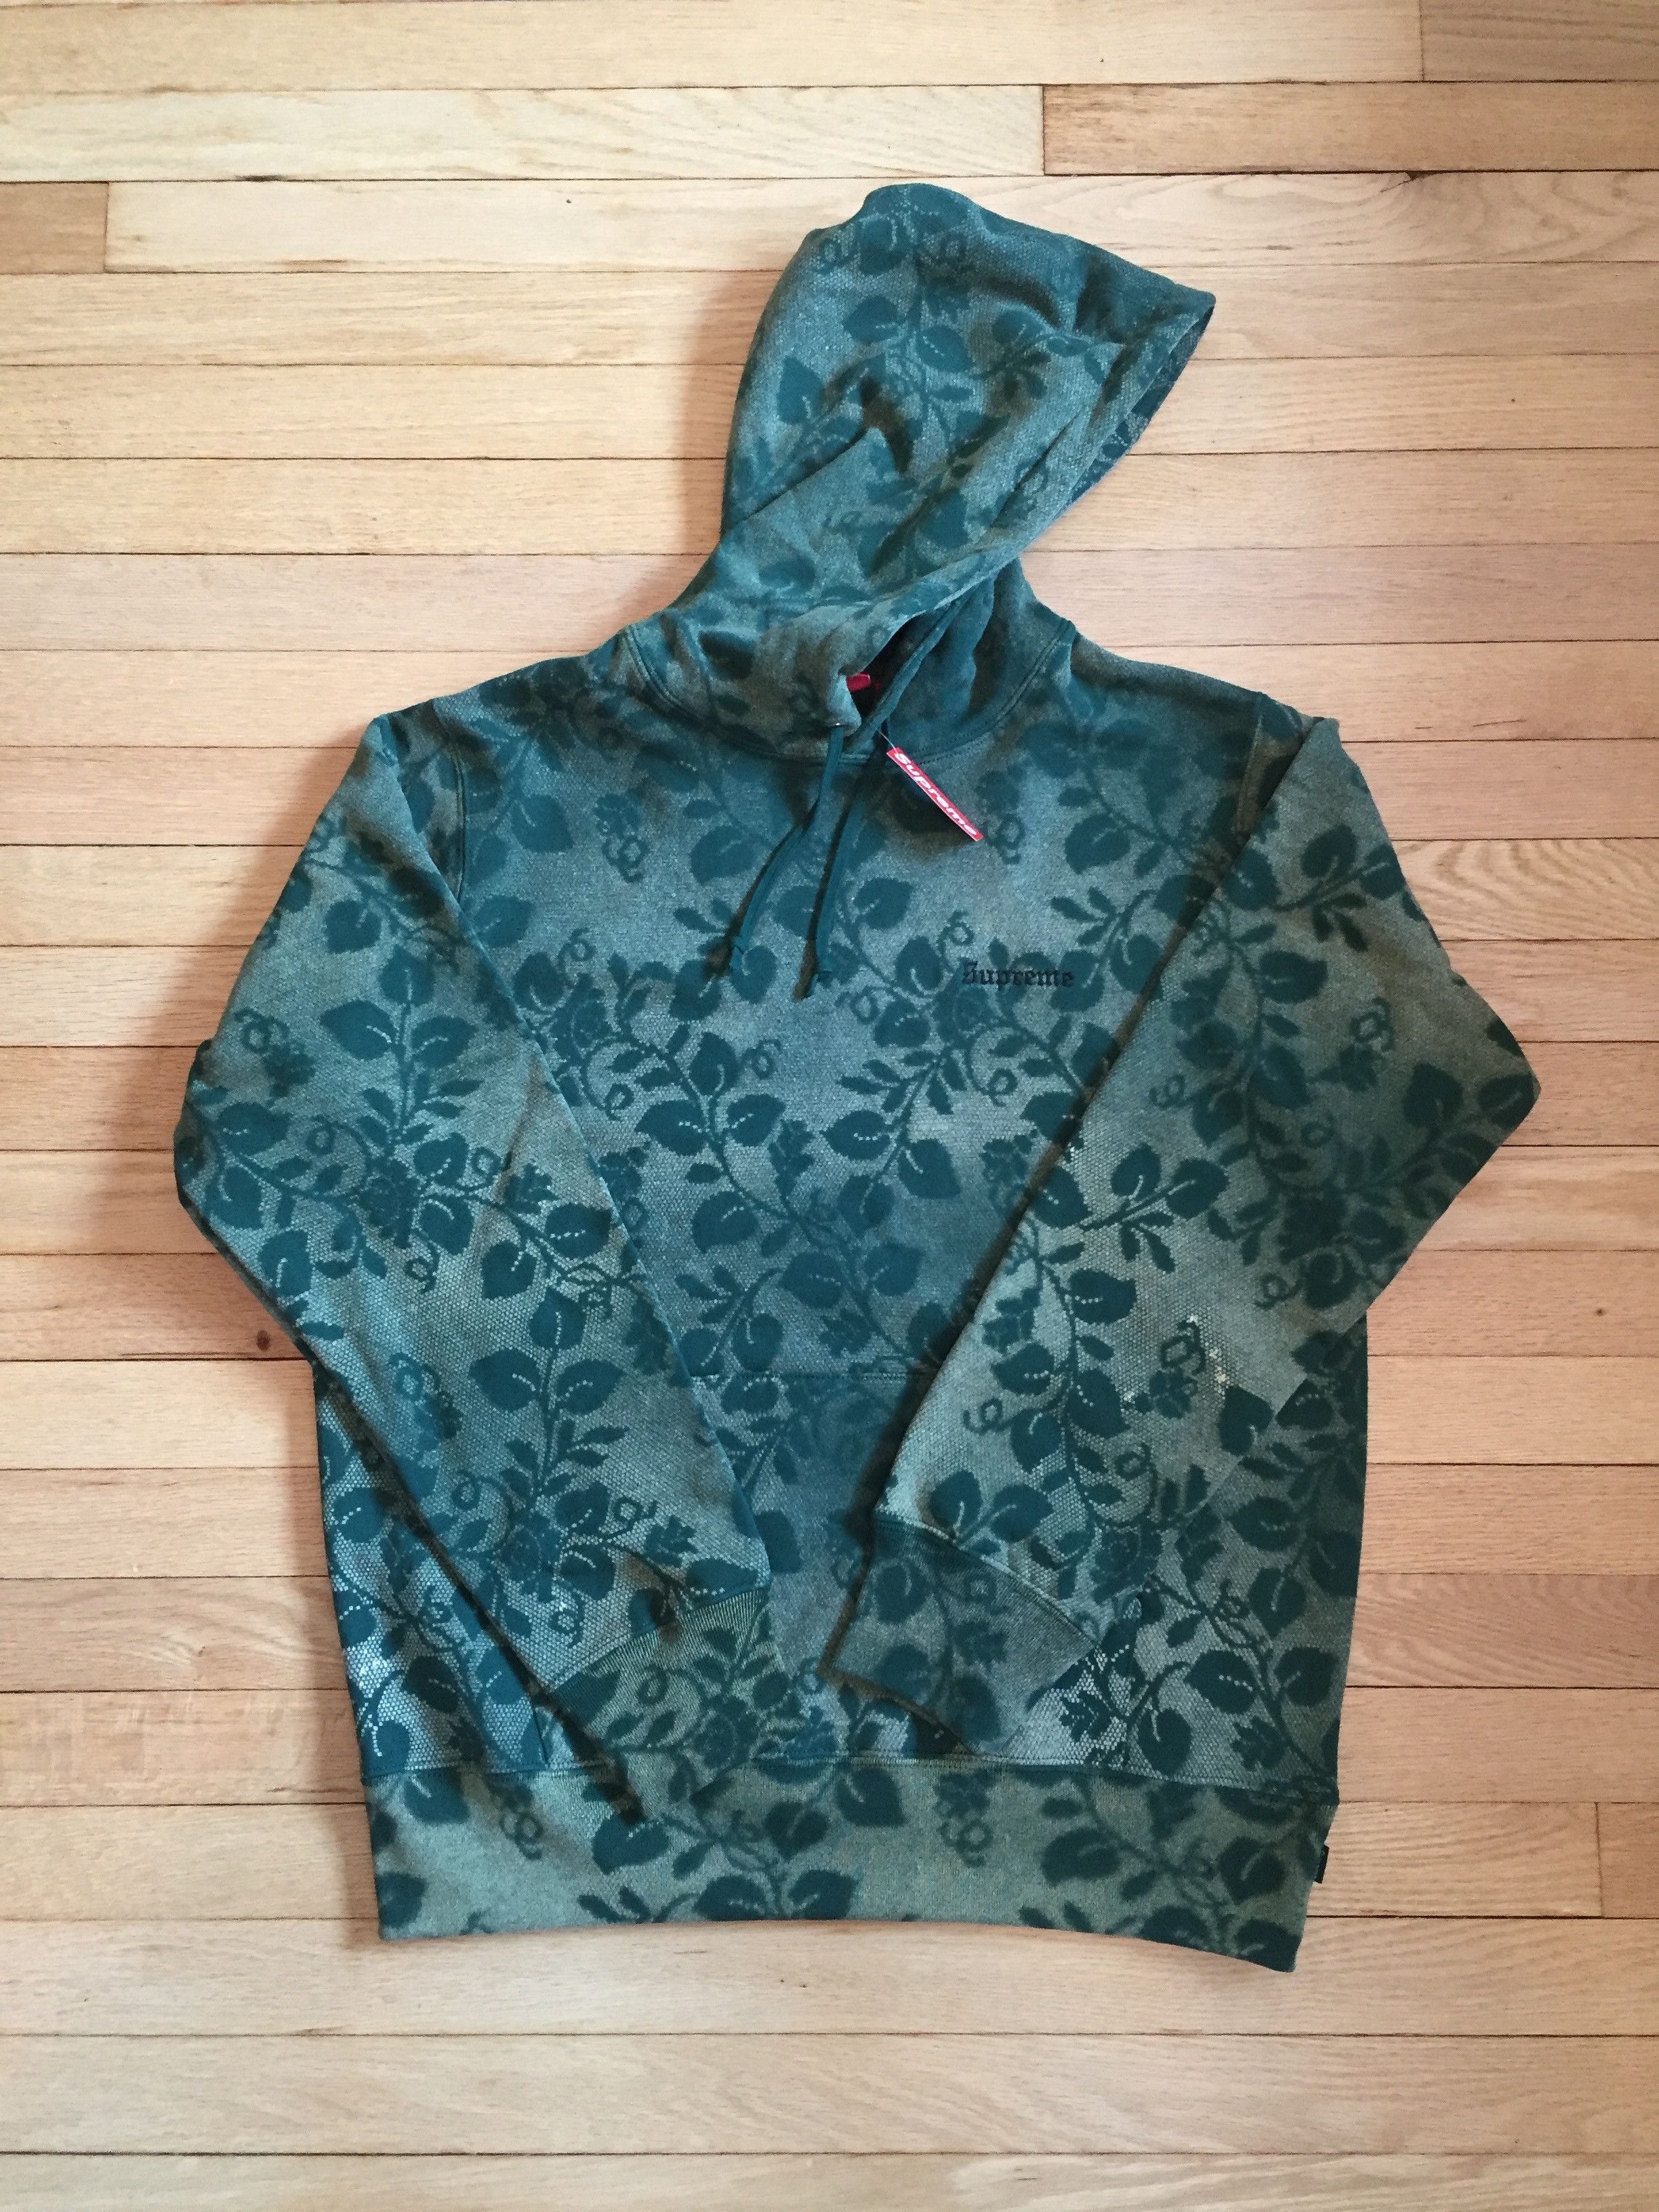 Supreme Bleached Lace Hooded Sweatshirt | Grailed